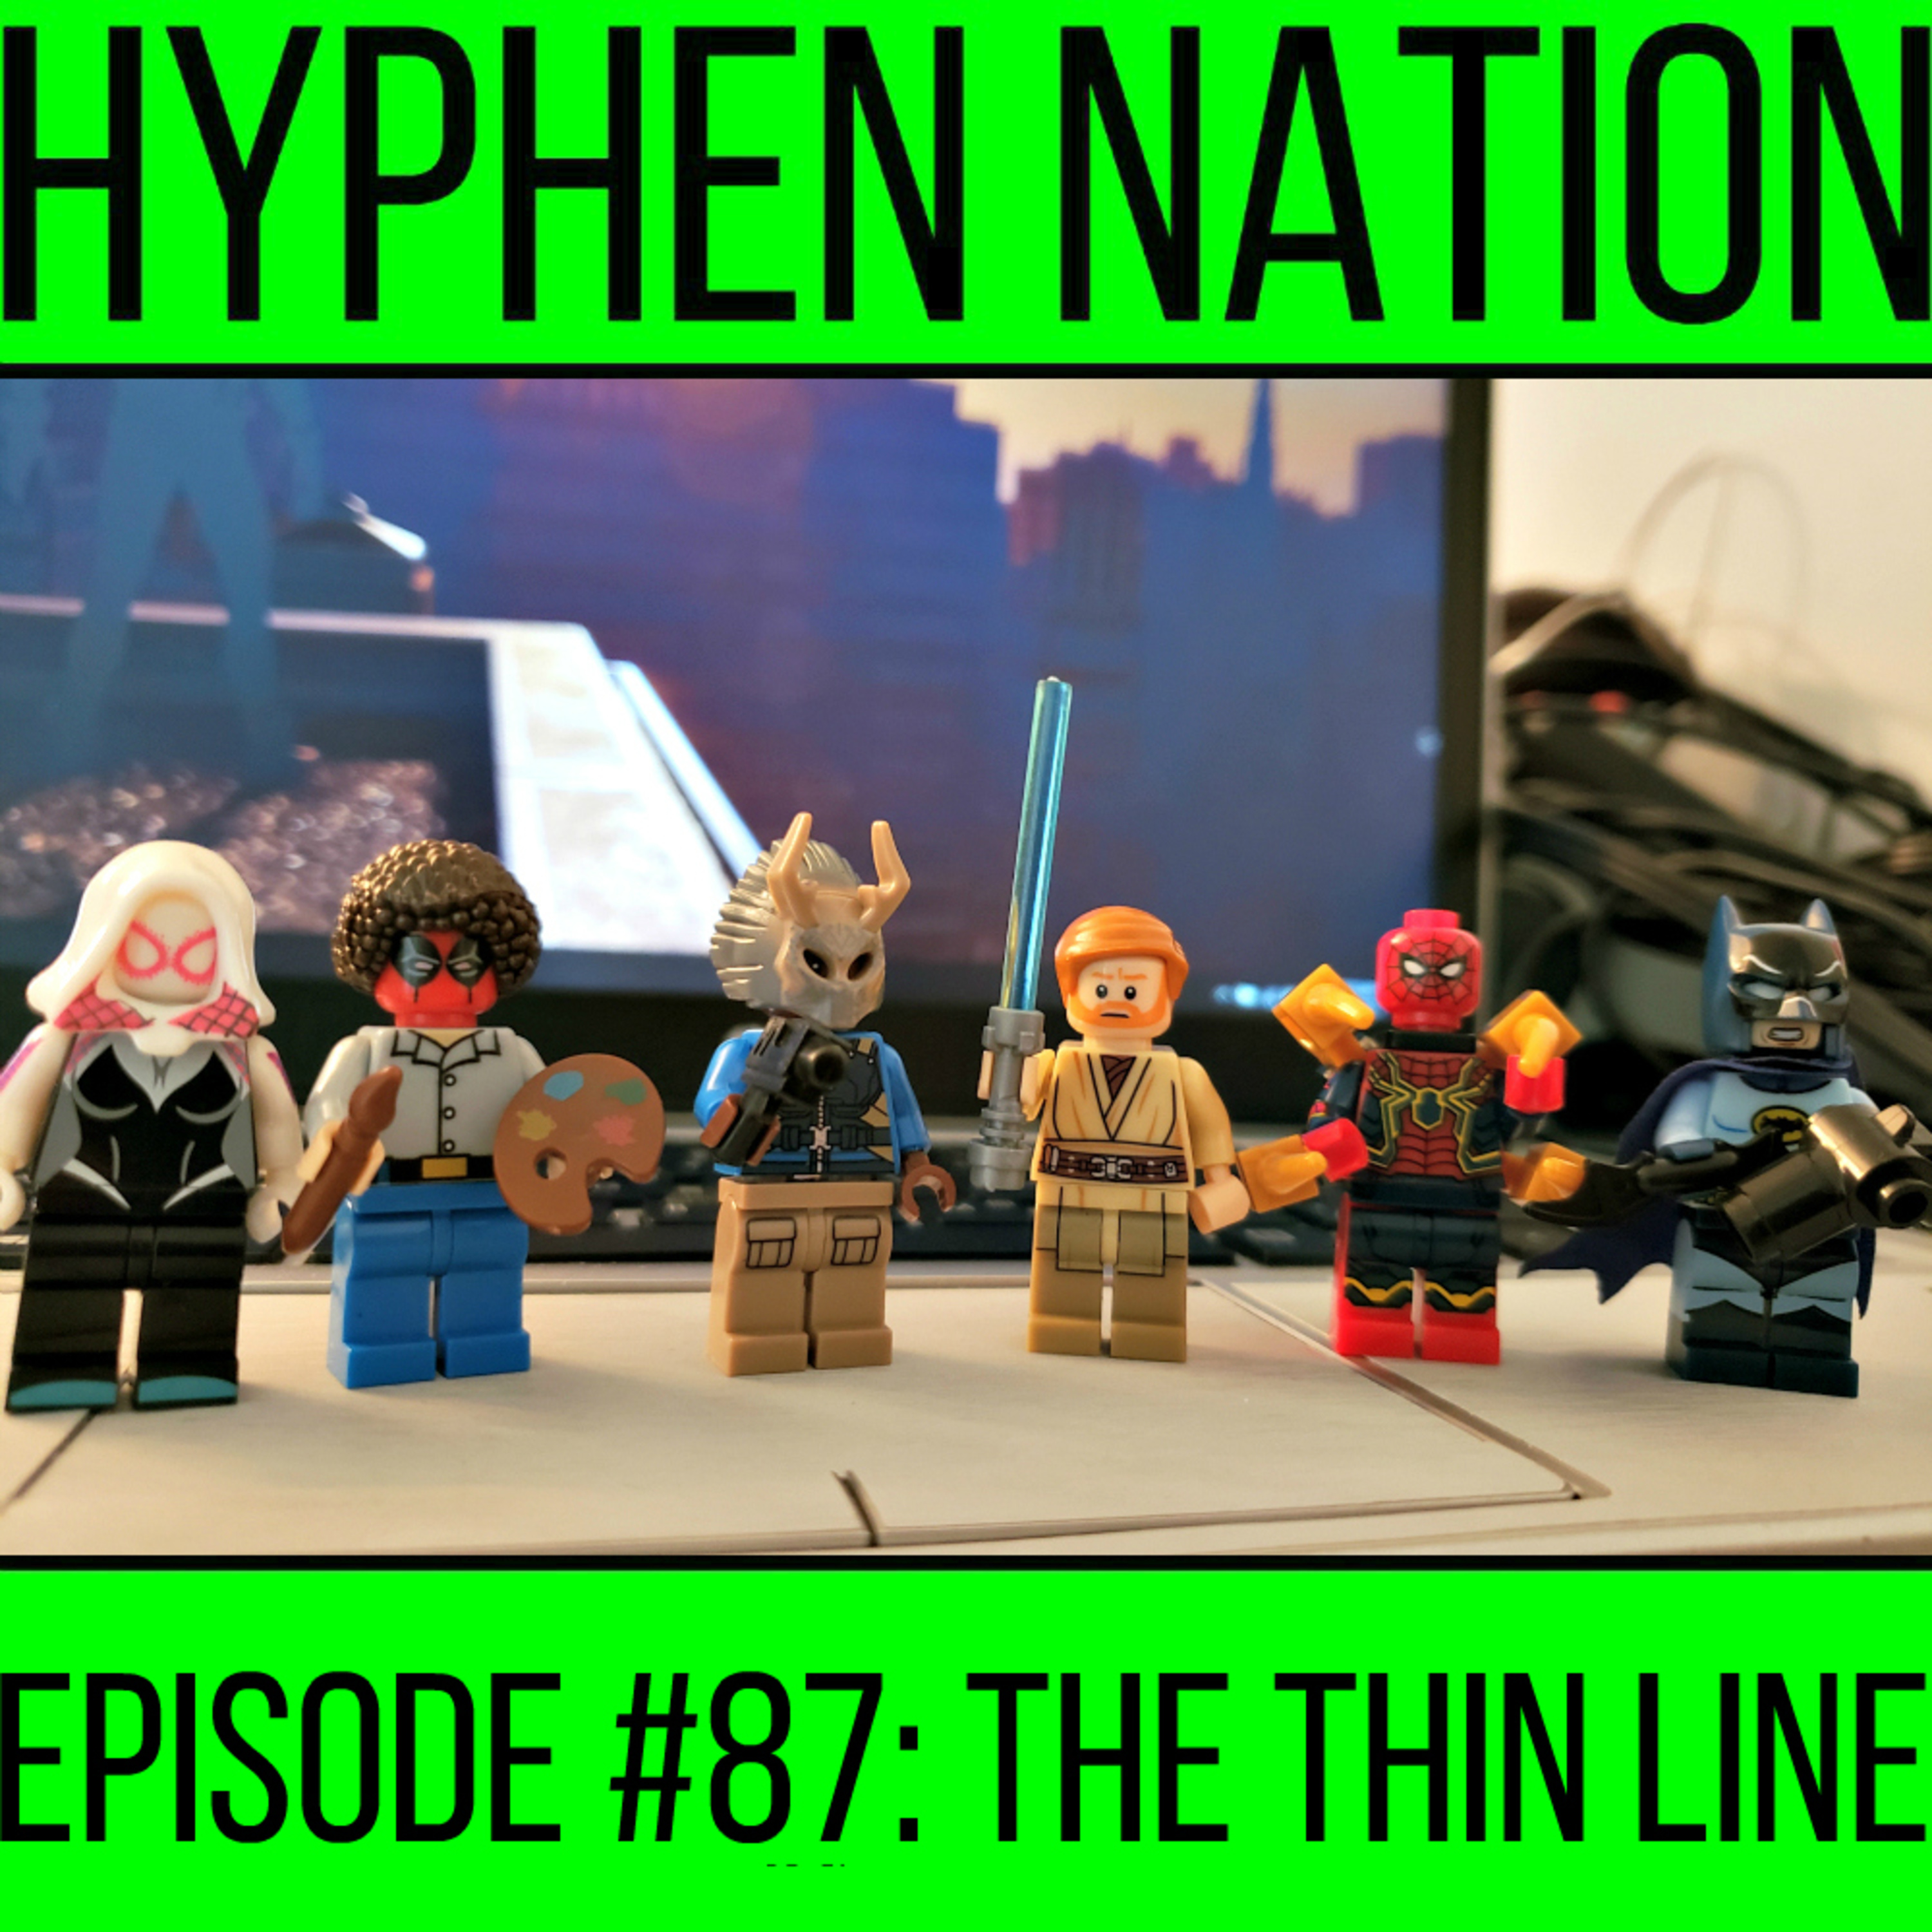 Episode #87: The Thin Line